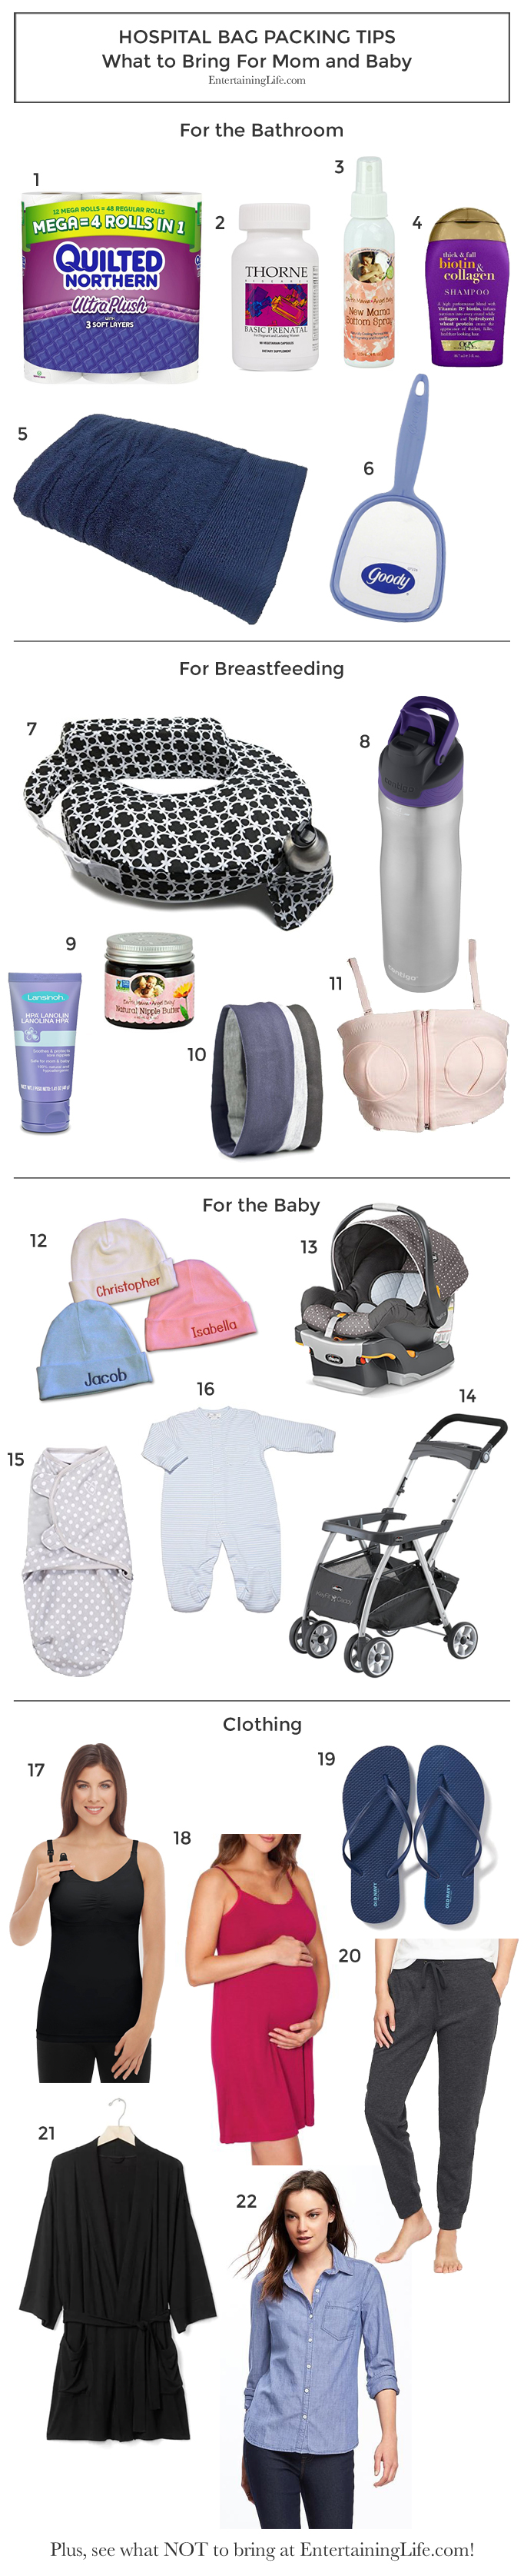 What-to-pack-Hospital-Bag-tips-mom-baby